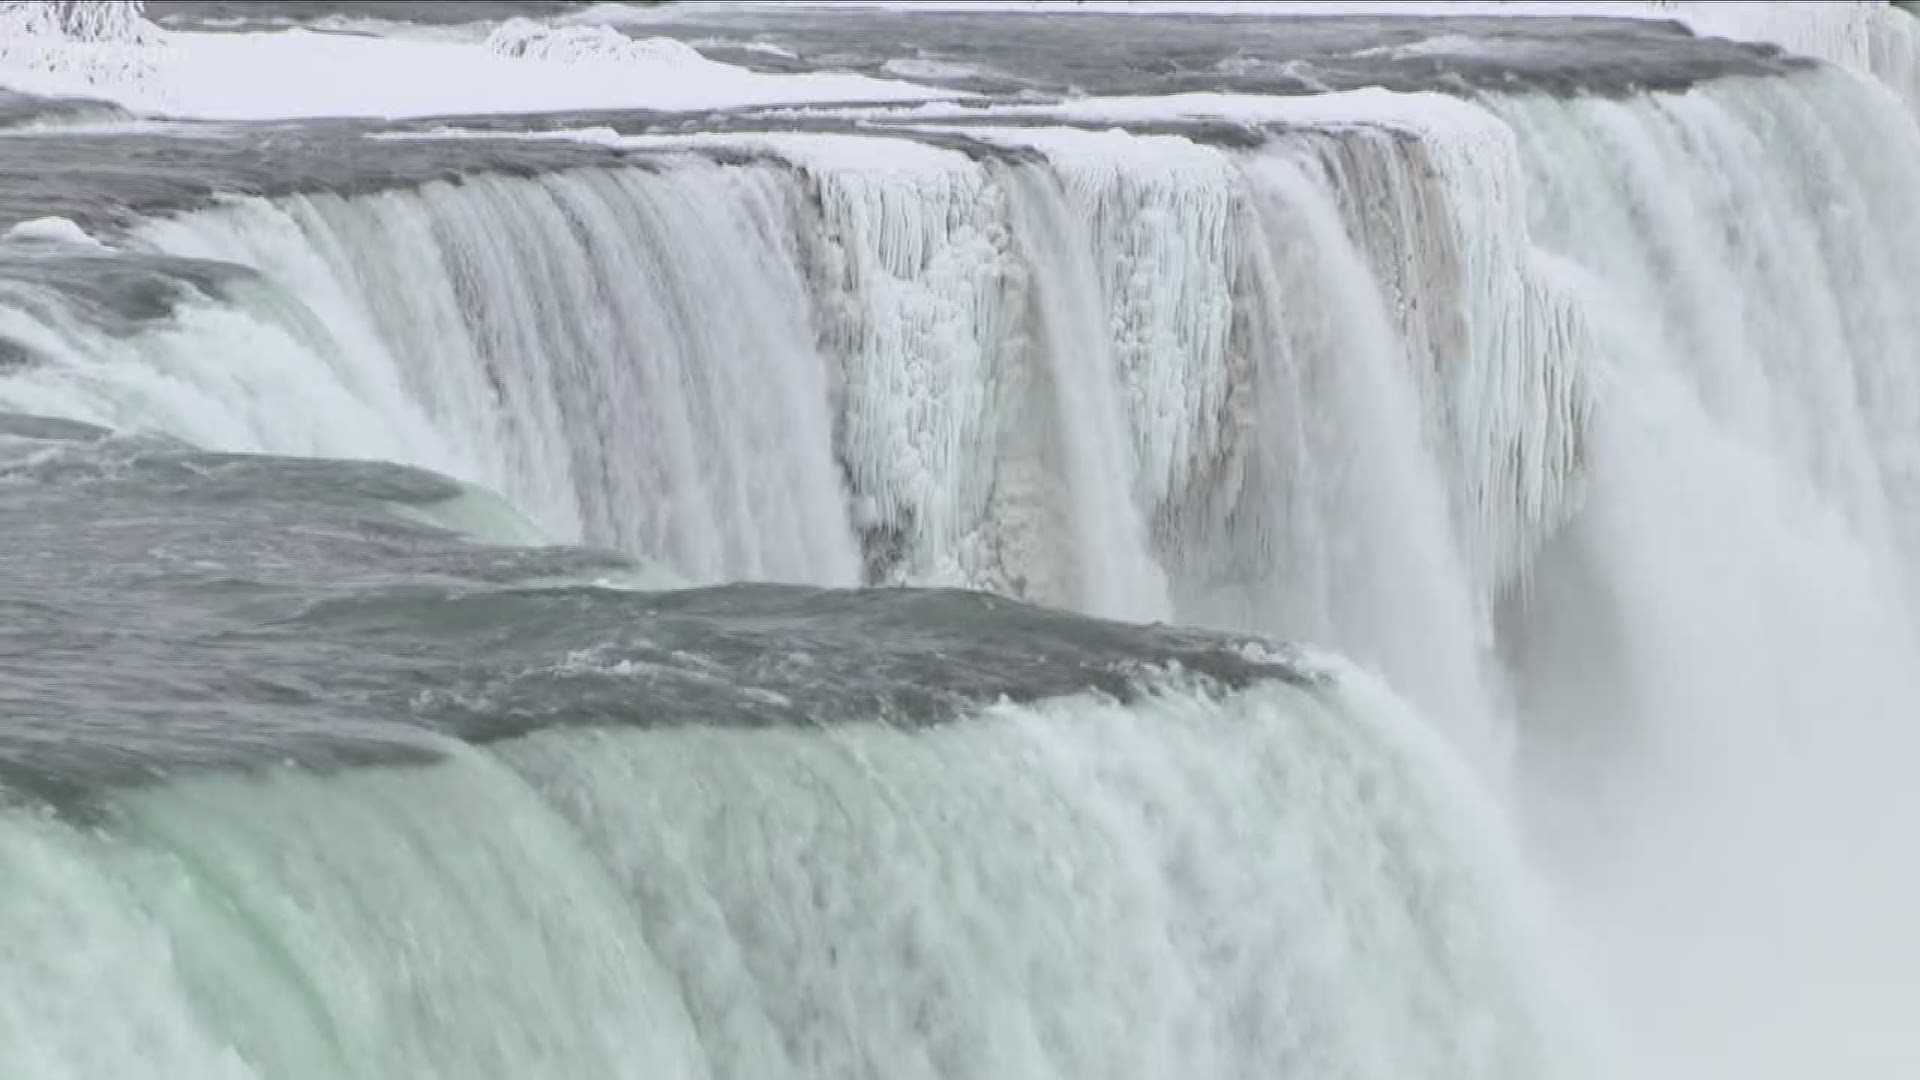 Photojournalist Dooley O'Rourke checks out the beauty of the falls during winter.